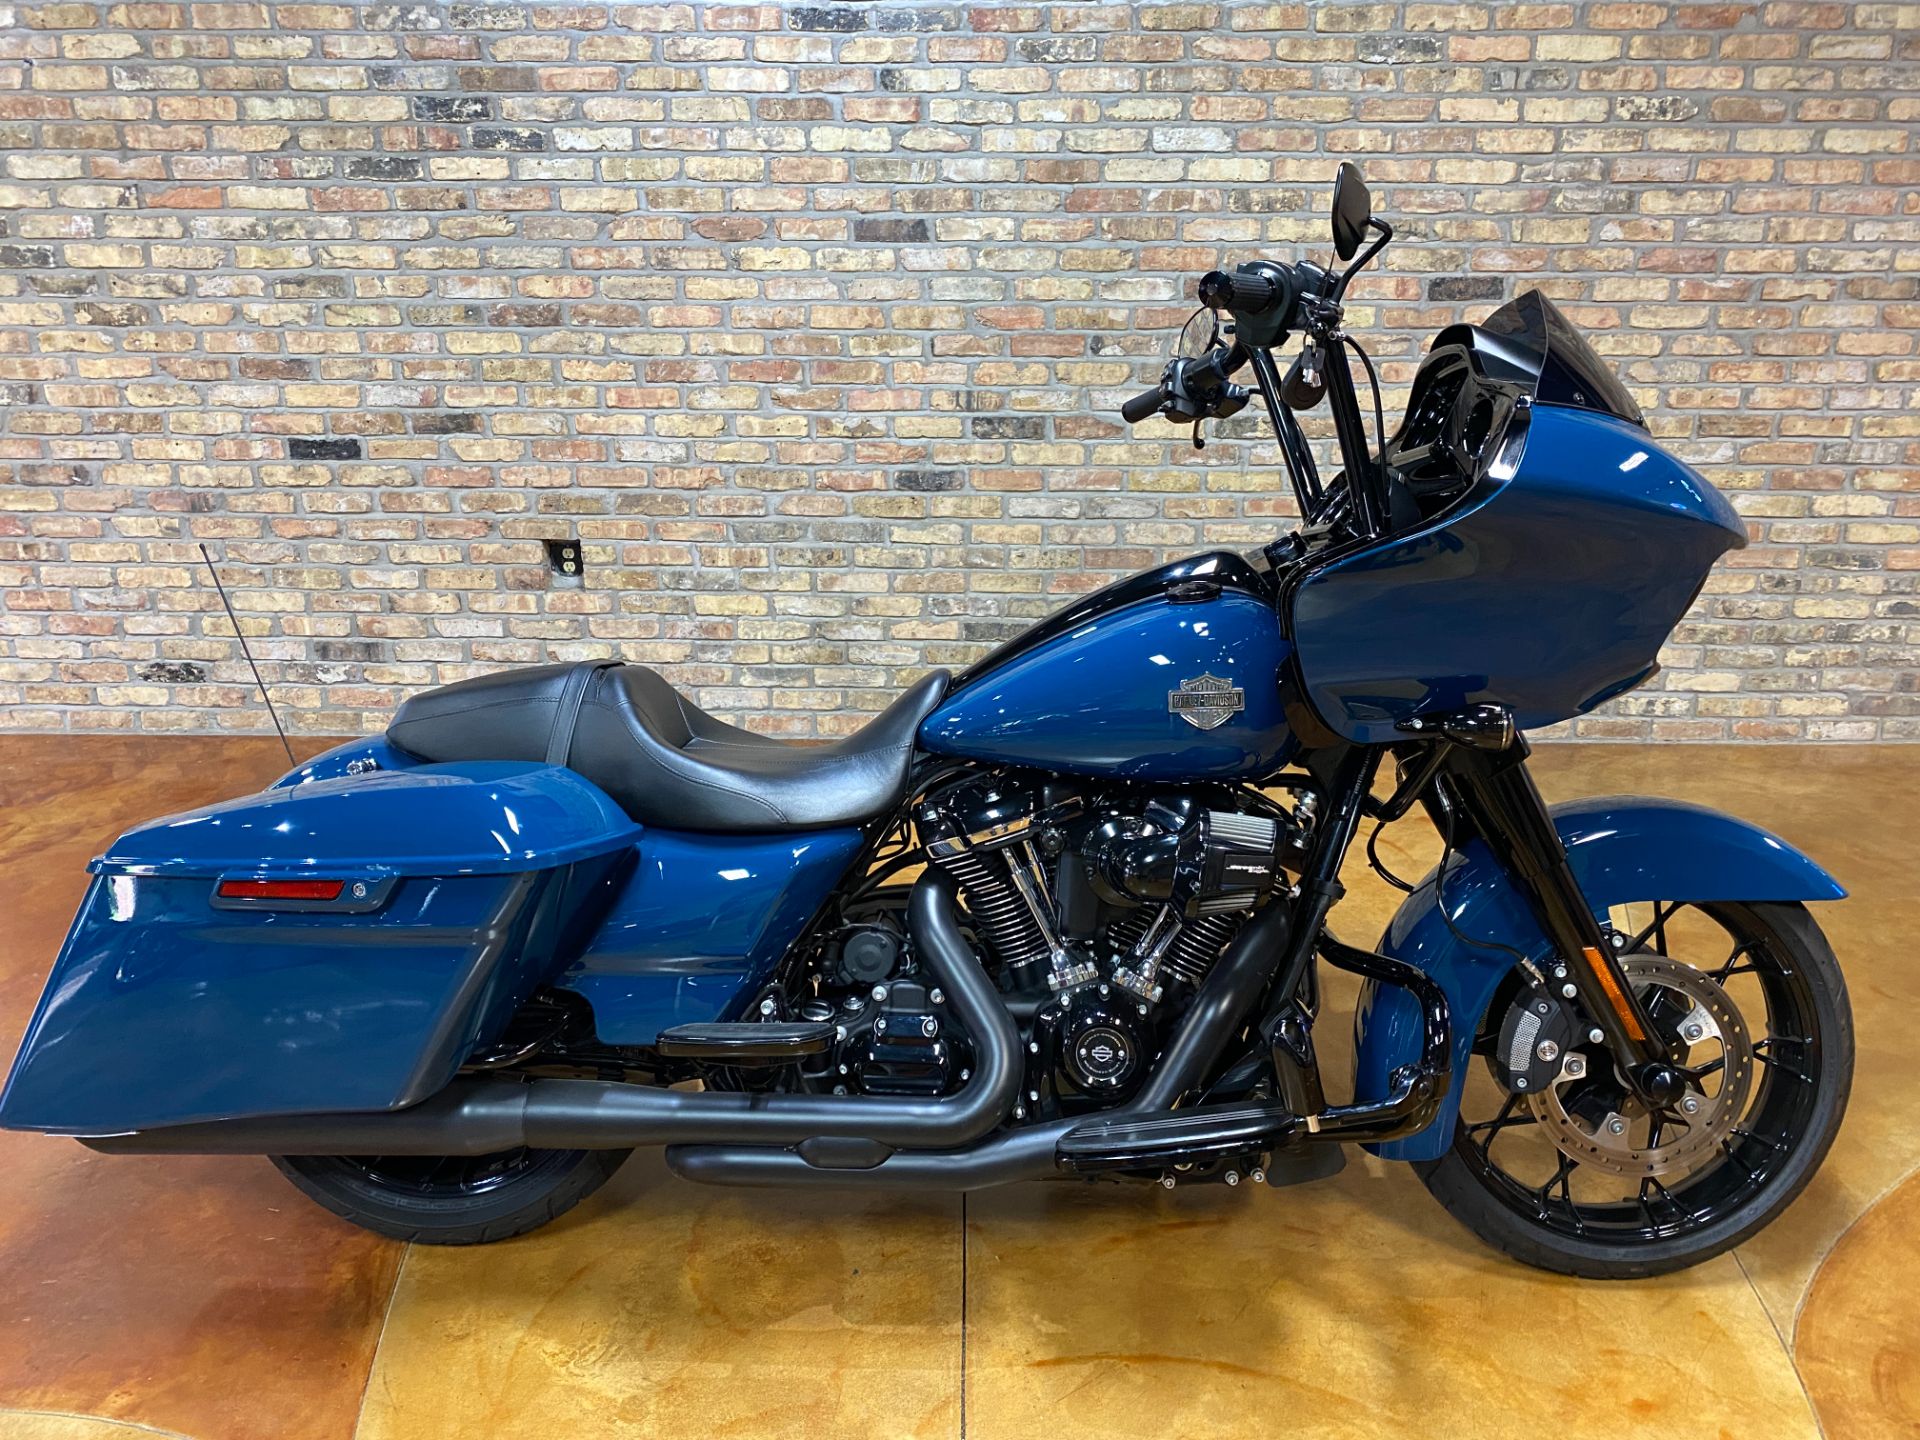 2021 Harley-Davidson Road Glide® Special in Big Bend, Wisconsin - Photo 10